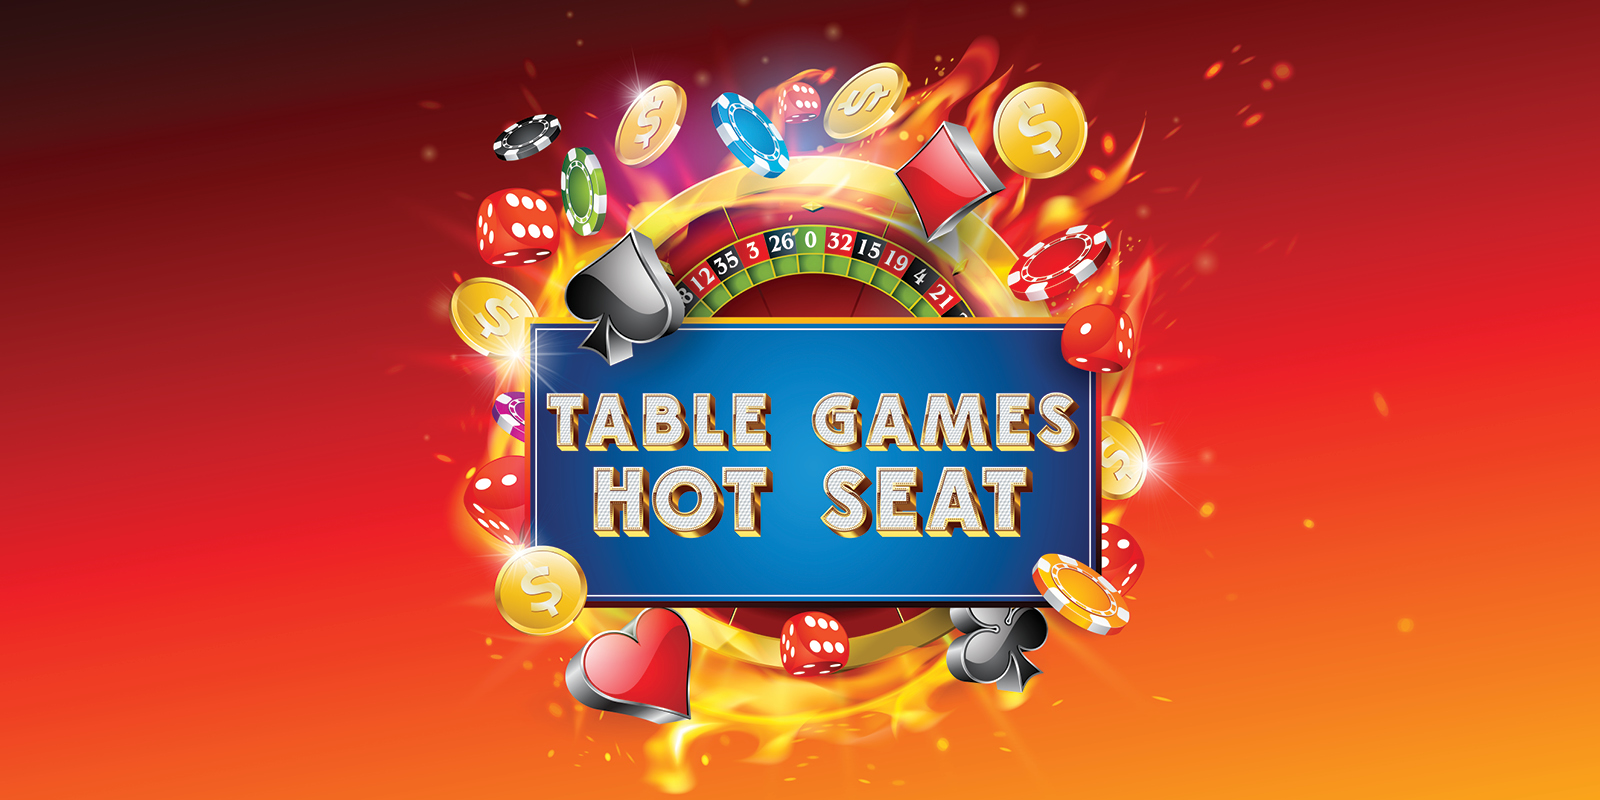 Table Games Hot Seat creative for November event